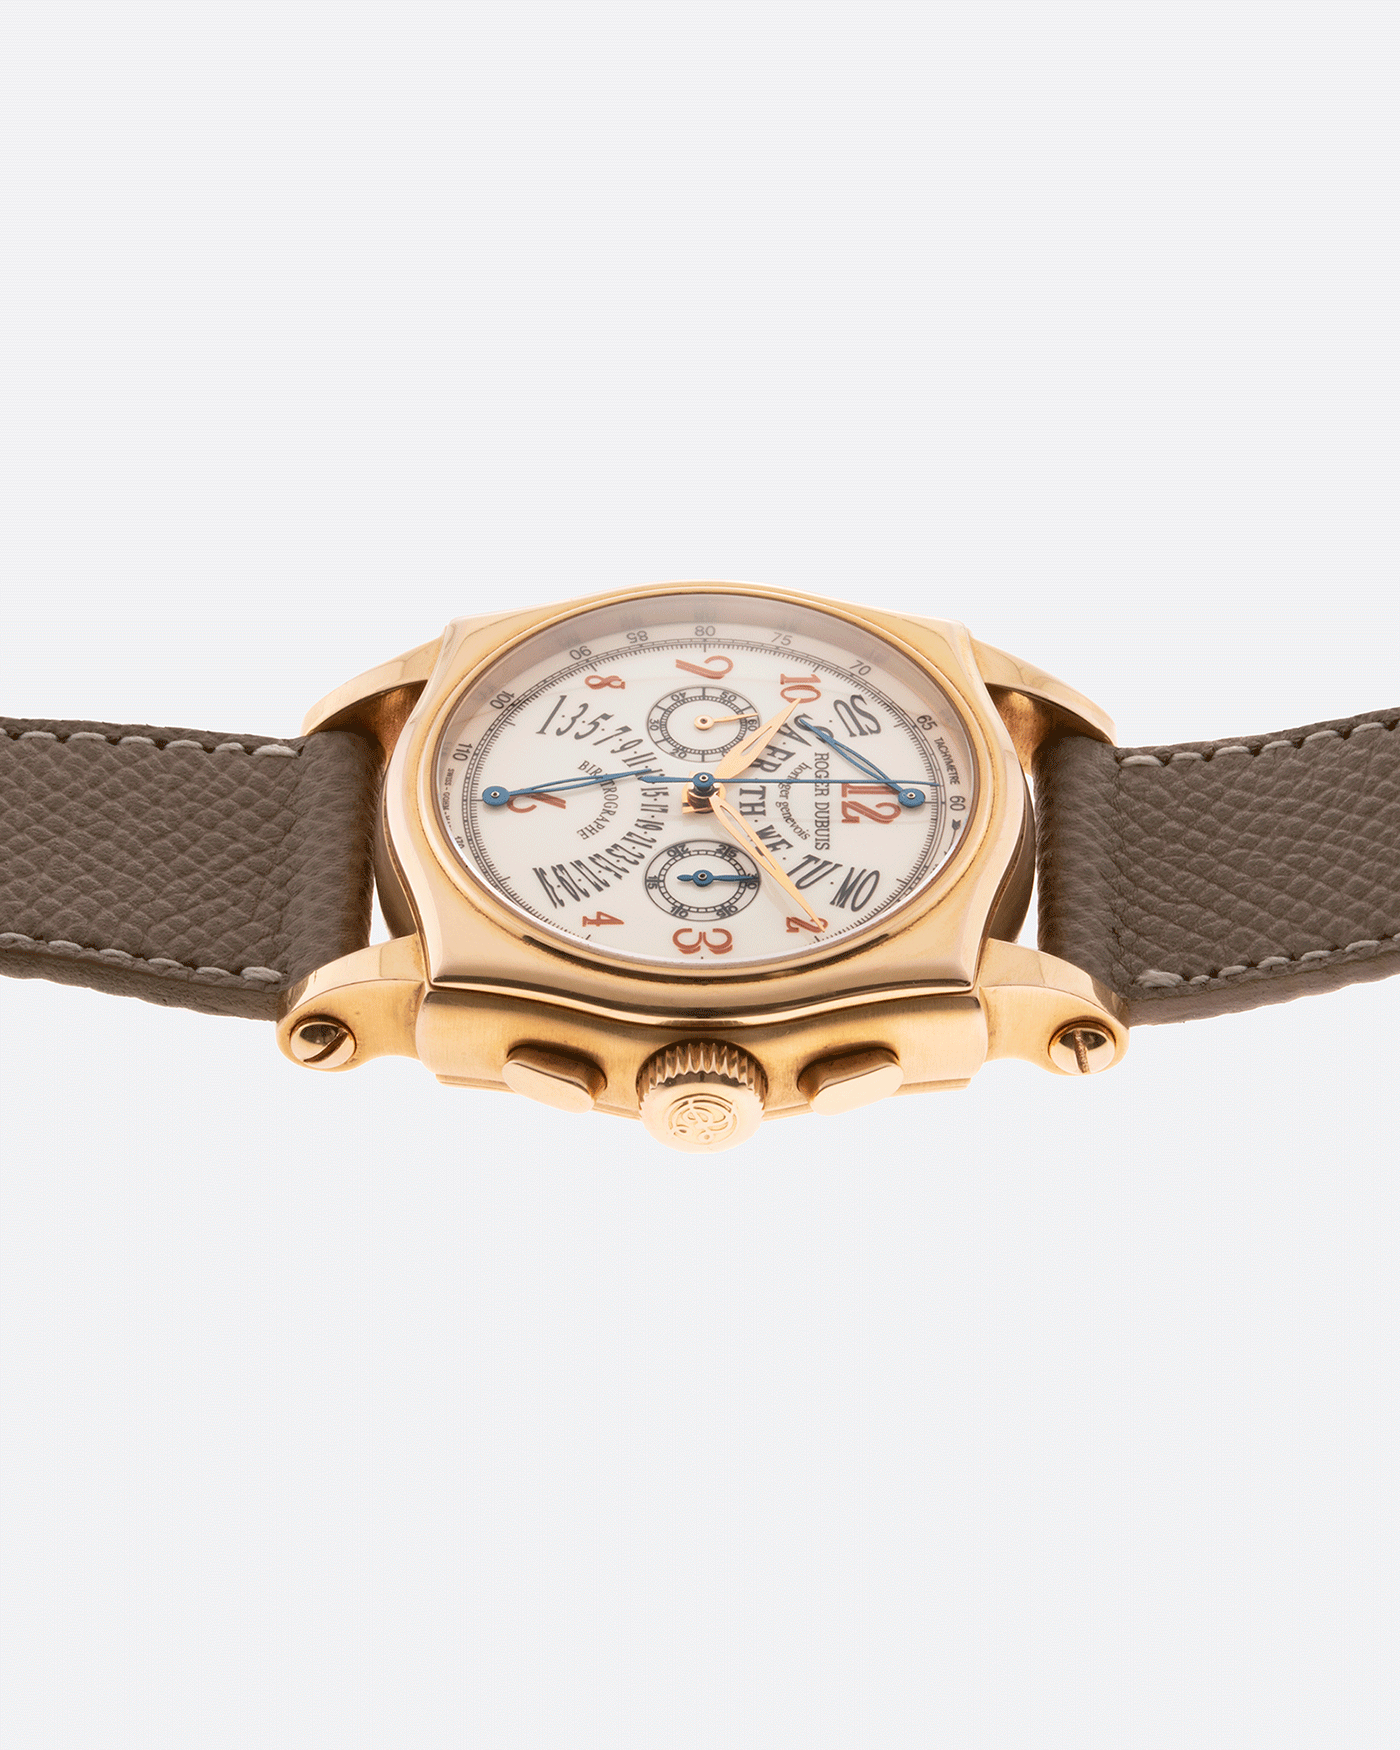 Roger Dubuis Sympathie 40 Biretrograde Chronograph Watch | S.Song Timepieces 